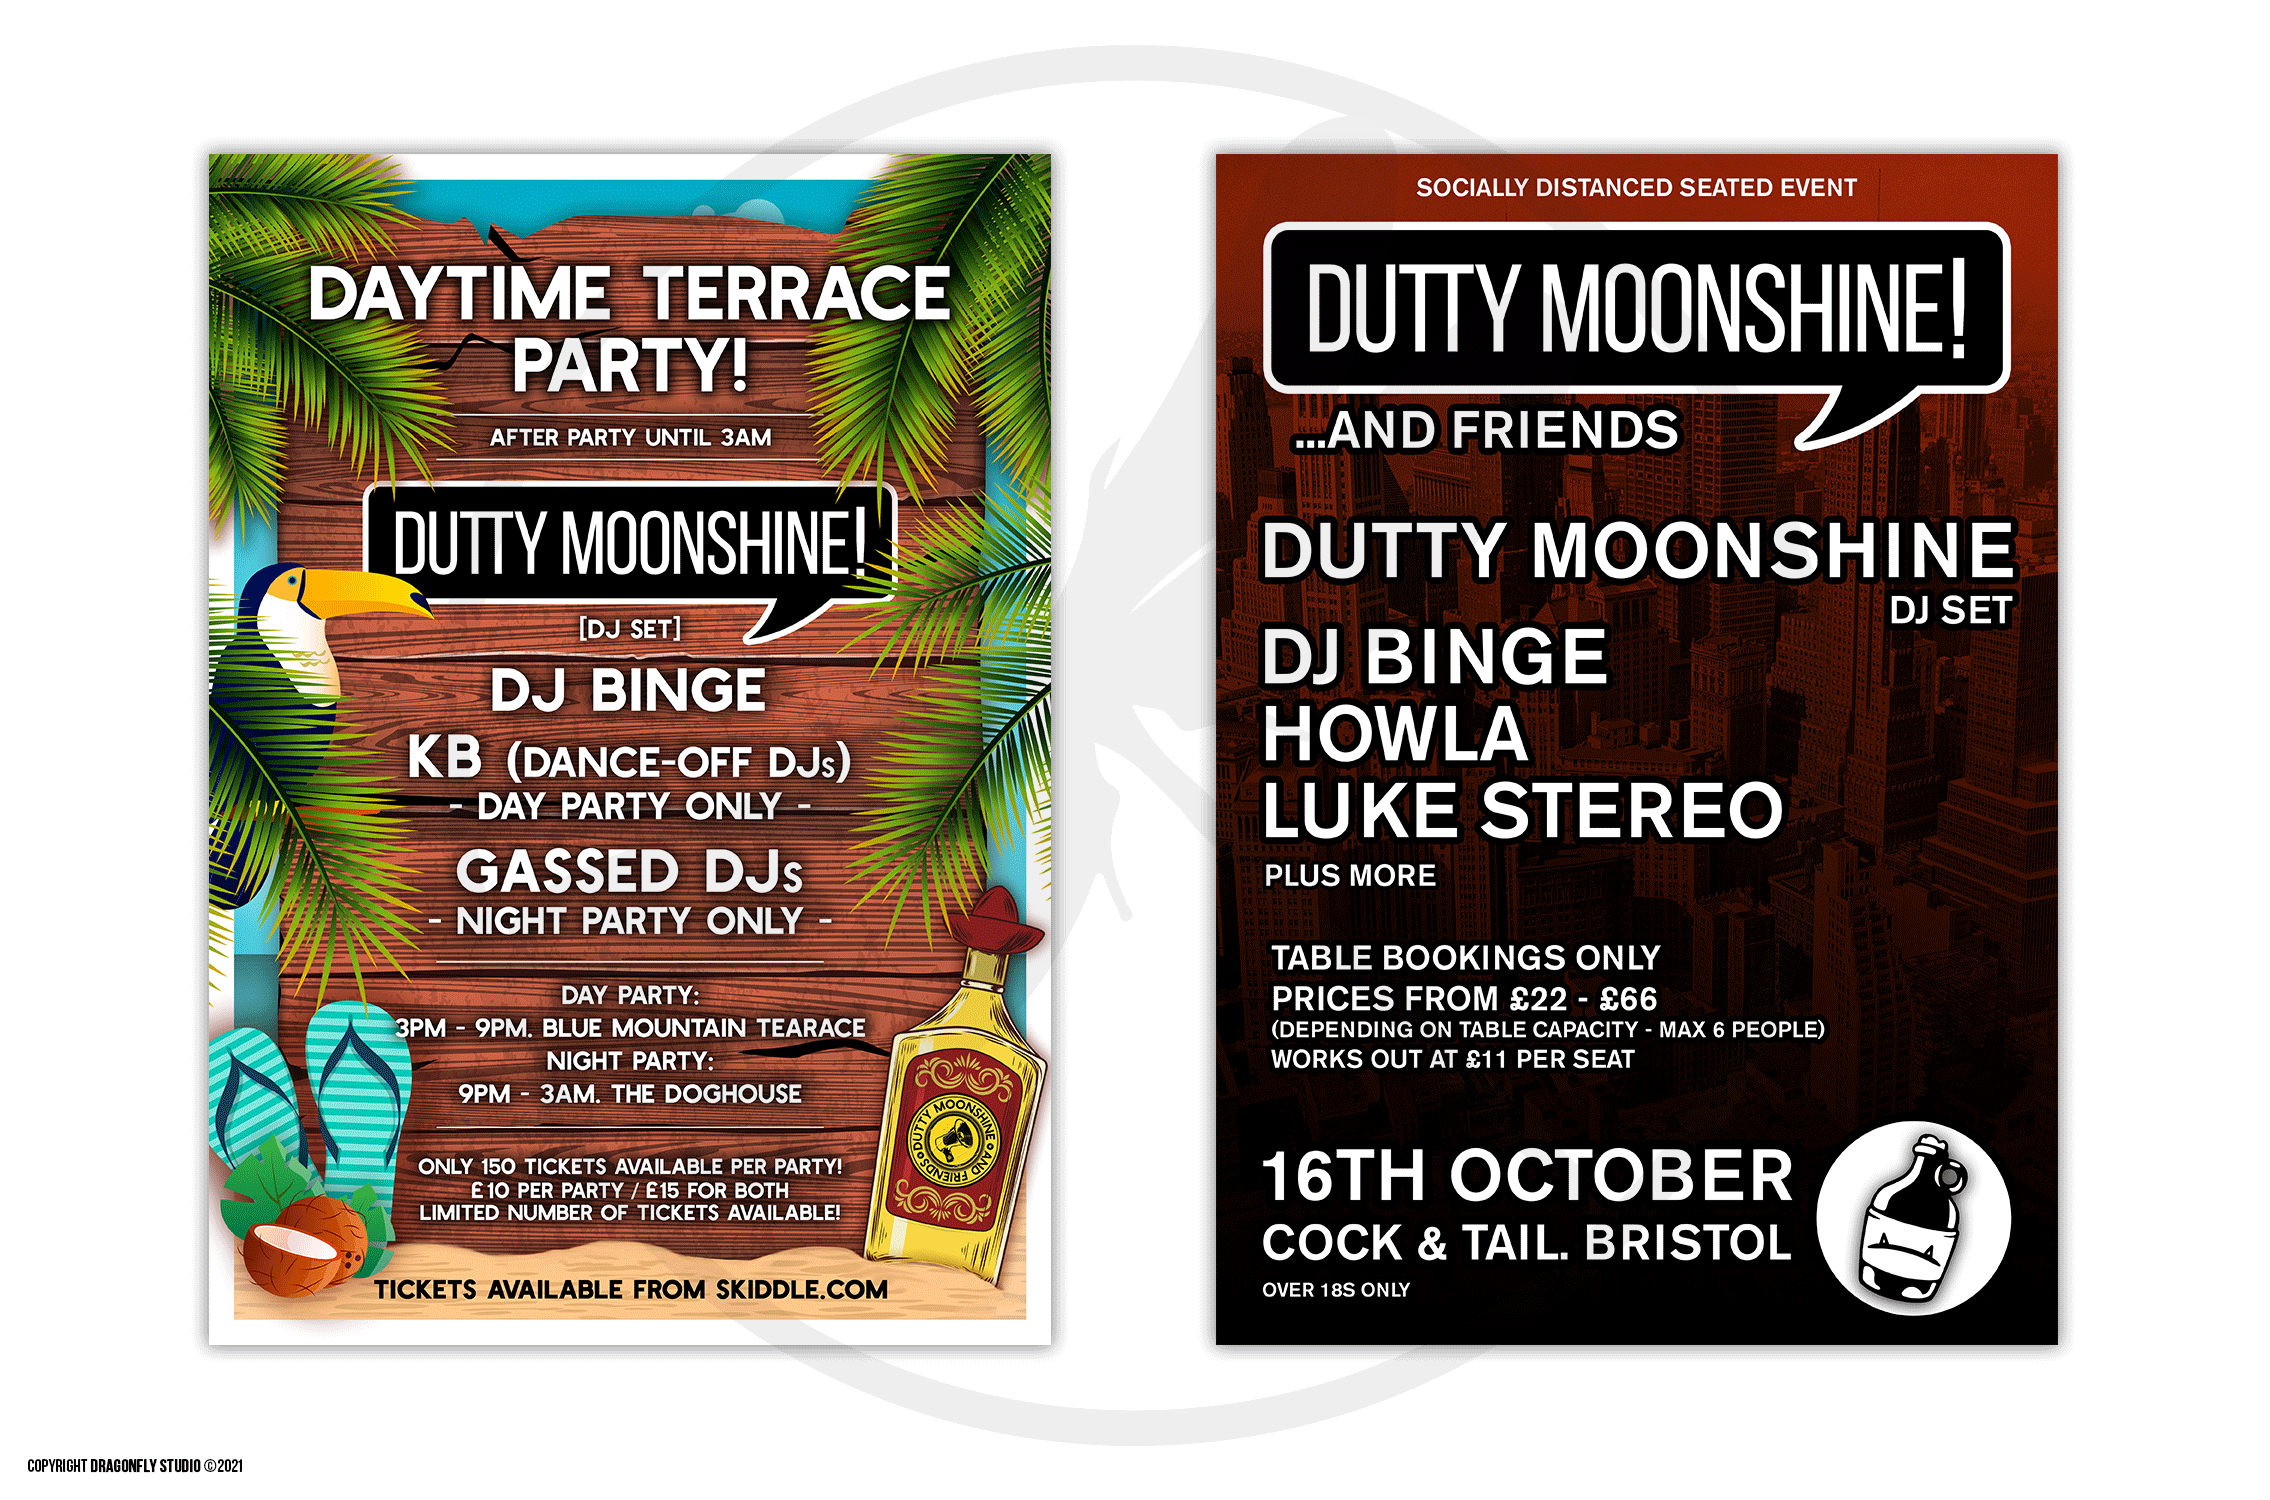 Dutty Moonshine Club Nights - Promotional Material